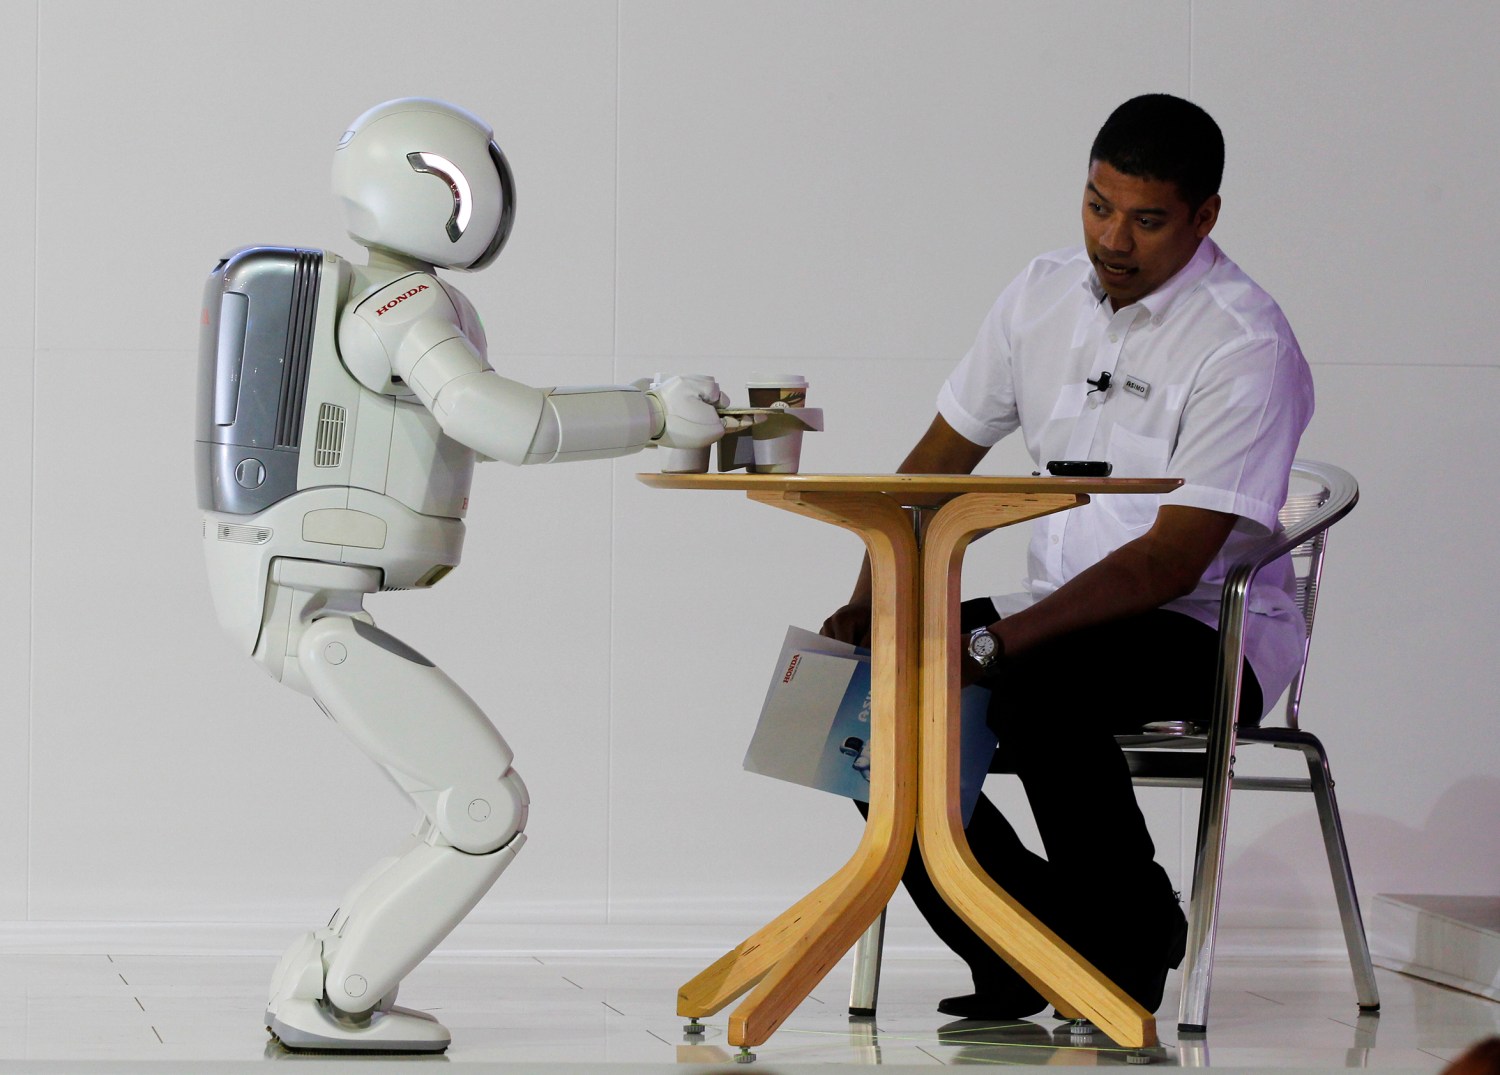 Reuters/Siphiwe Sibeko - ASIMO, a humanoid robot created by Honda Motor Company, serving tea to a guest